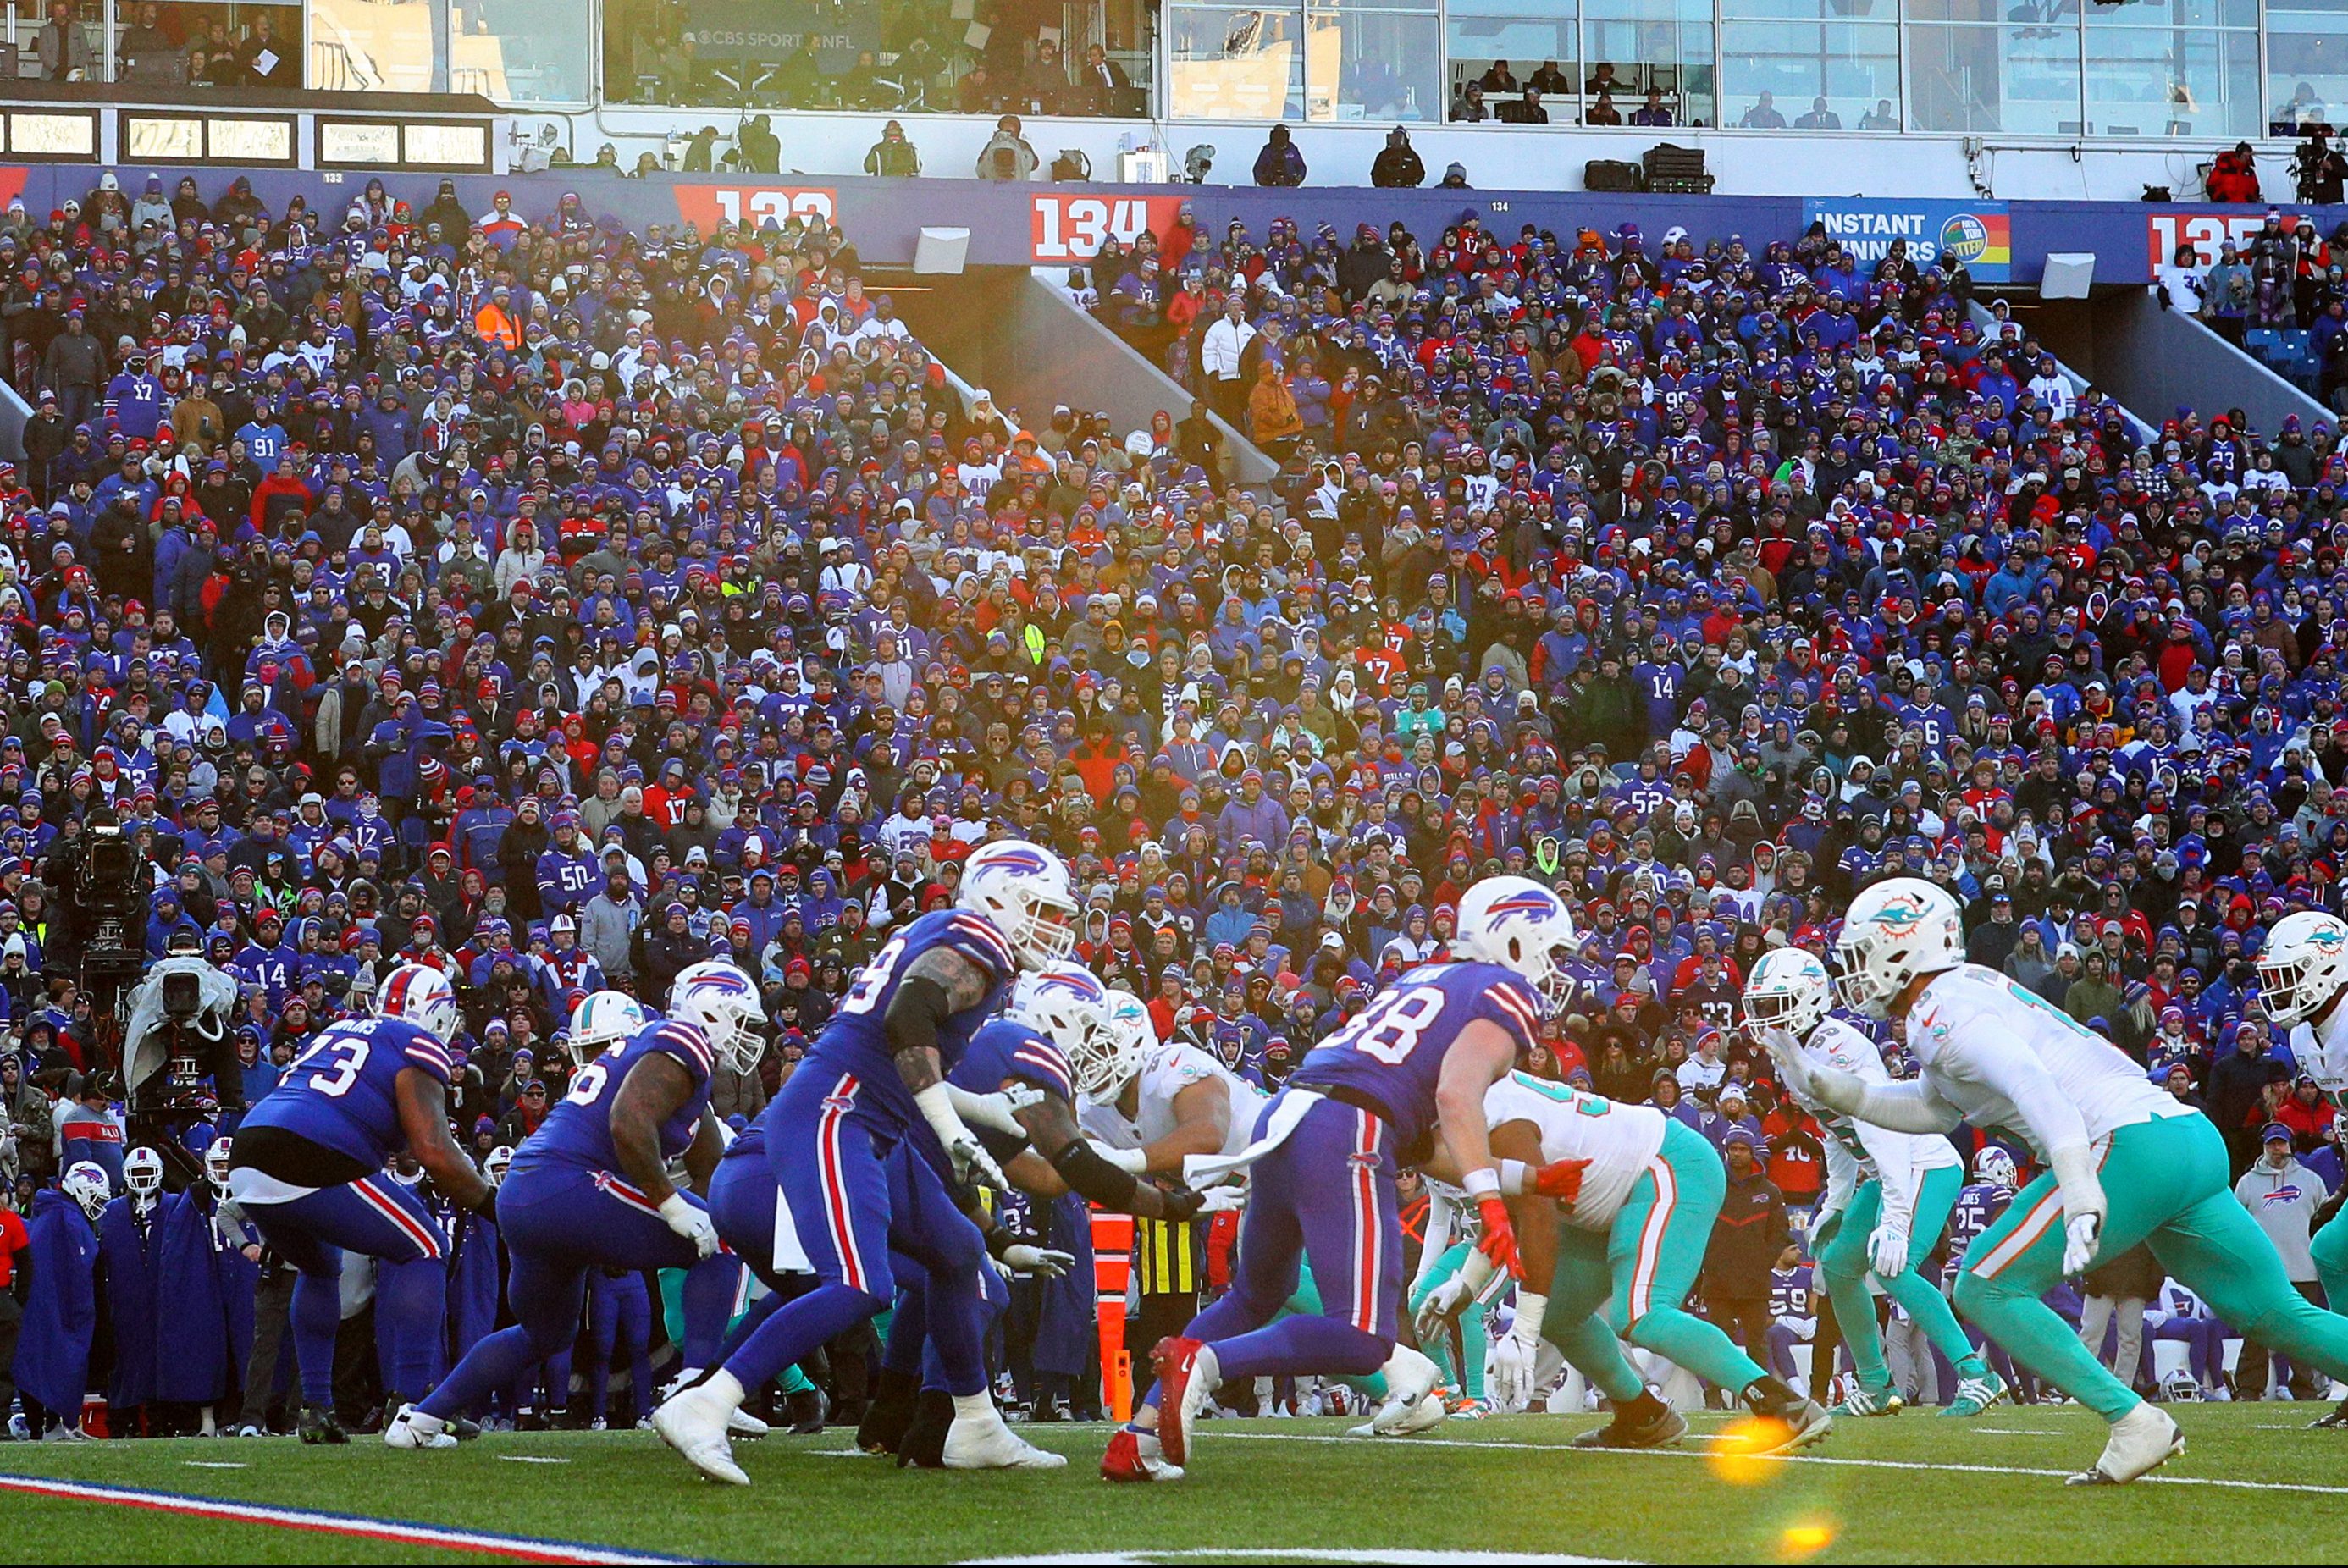 The Miami Dolphins and Buffalo Bills in the AFC Wild Card playoff game.